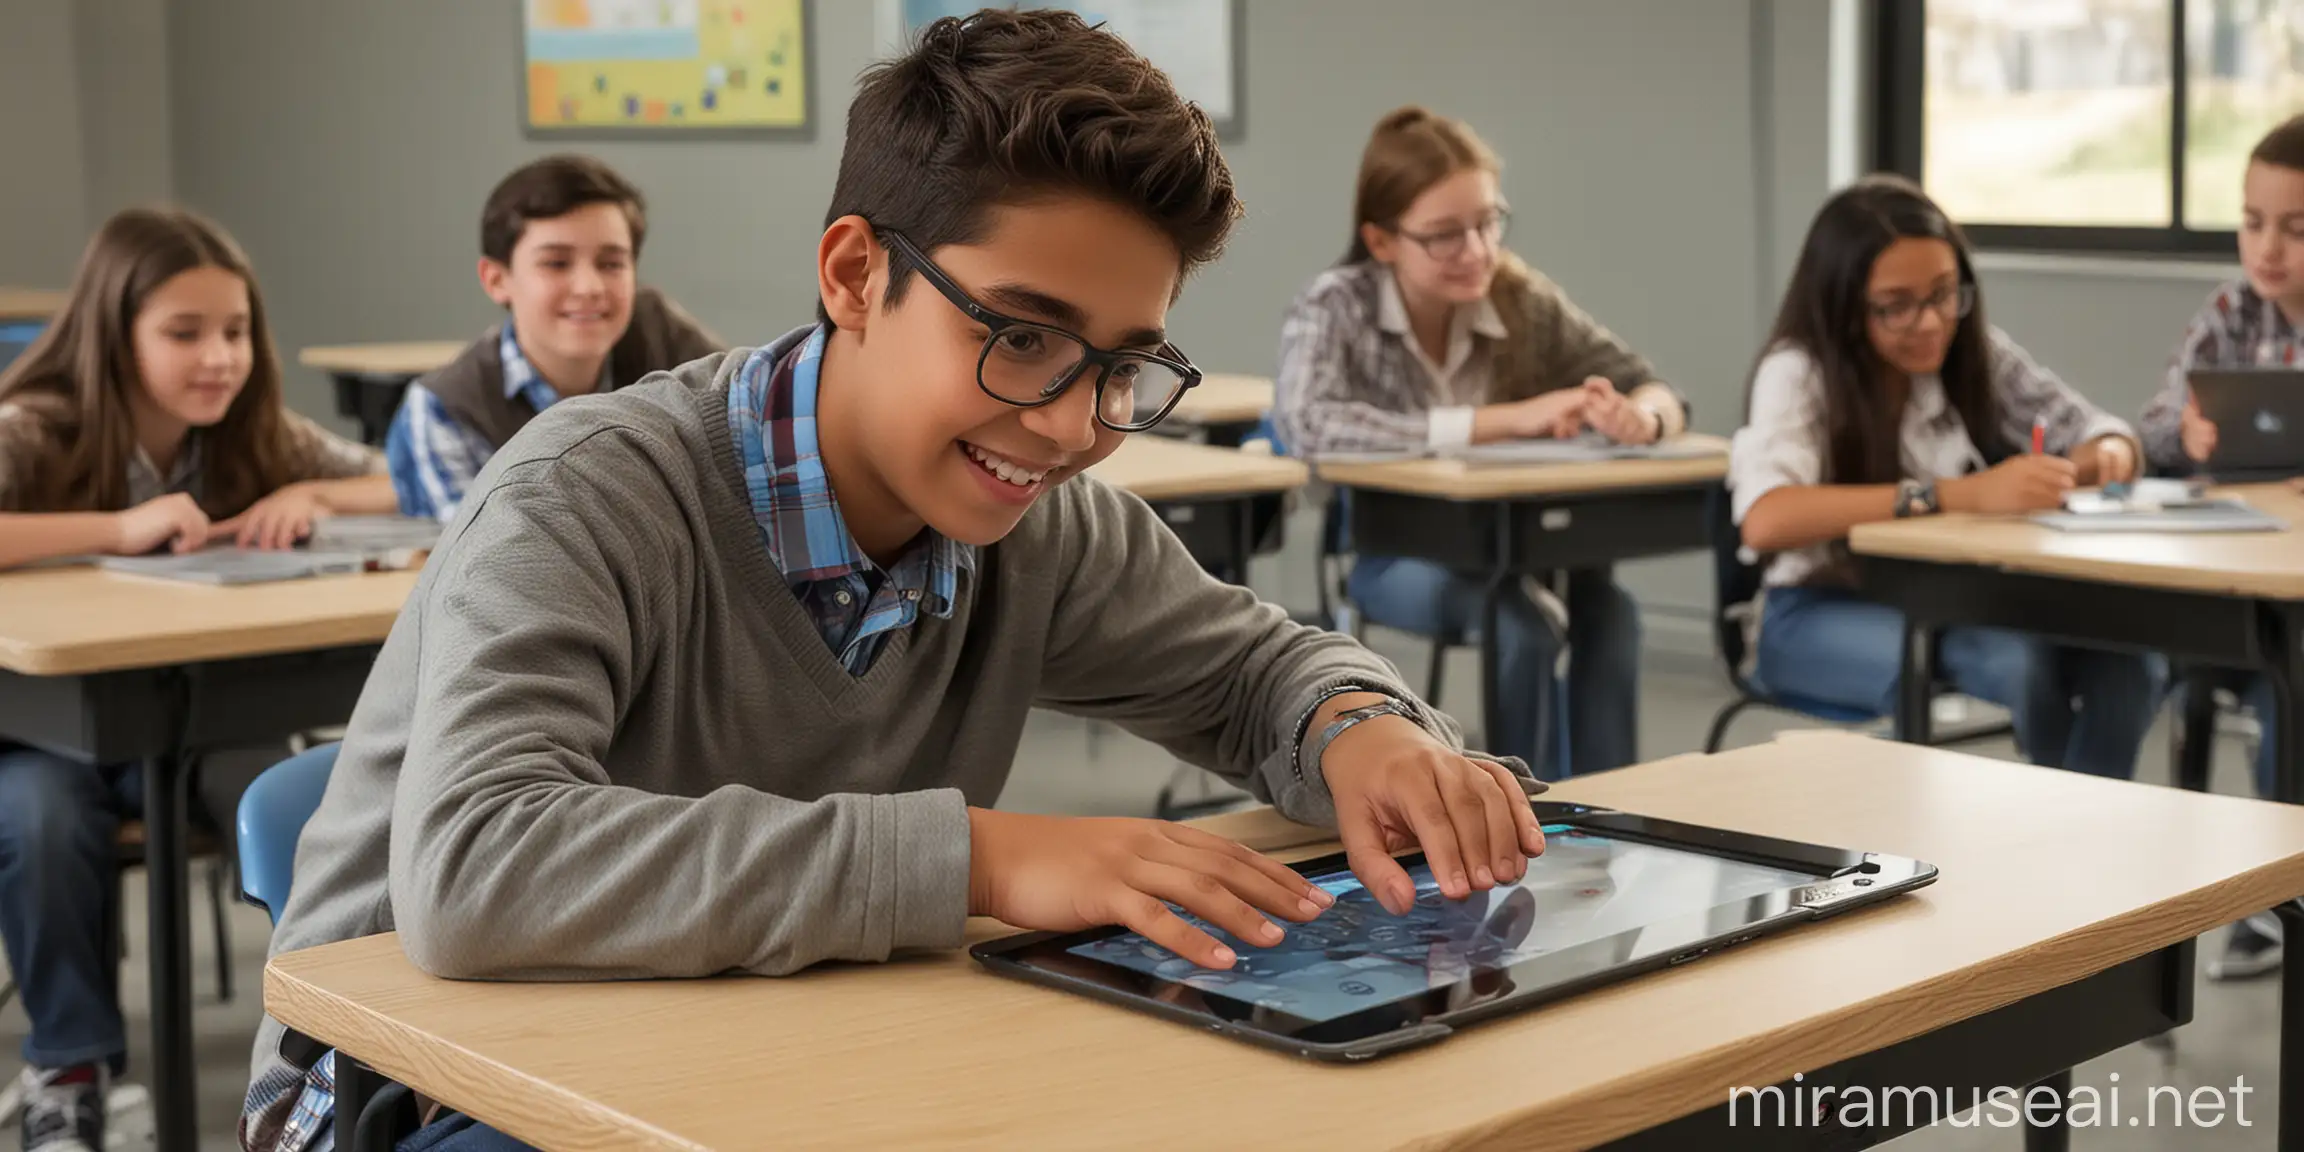 he student, with a happy and engaged expression, is focused on the touch panel embedded in the school desk in front of him, actively interacting with the educational material, tapping and swiping the screen. Other students in the classroom also have joyful and enthusiastic faces as they use touch panels integrated into their desks, working individually or in groups to complete assignments and participate in activities. The room is filled with the soft hum of technology as students absorb information and collaborate with their peers, using advanced technology for learning. A futuristic vision of education, where technology plays a key role in enhancing the educational process, allows students to immerse themselves in learning and explore the world of knowledge through touch panels integrated into their school desks.